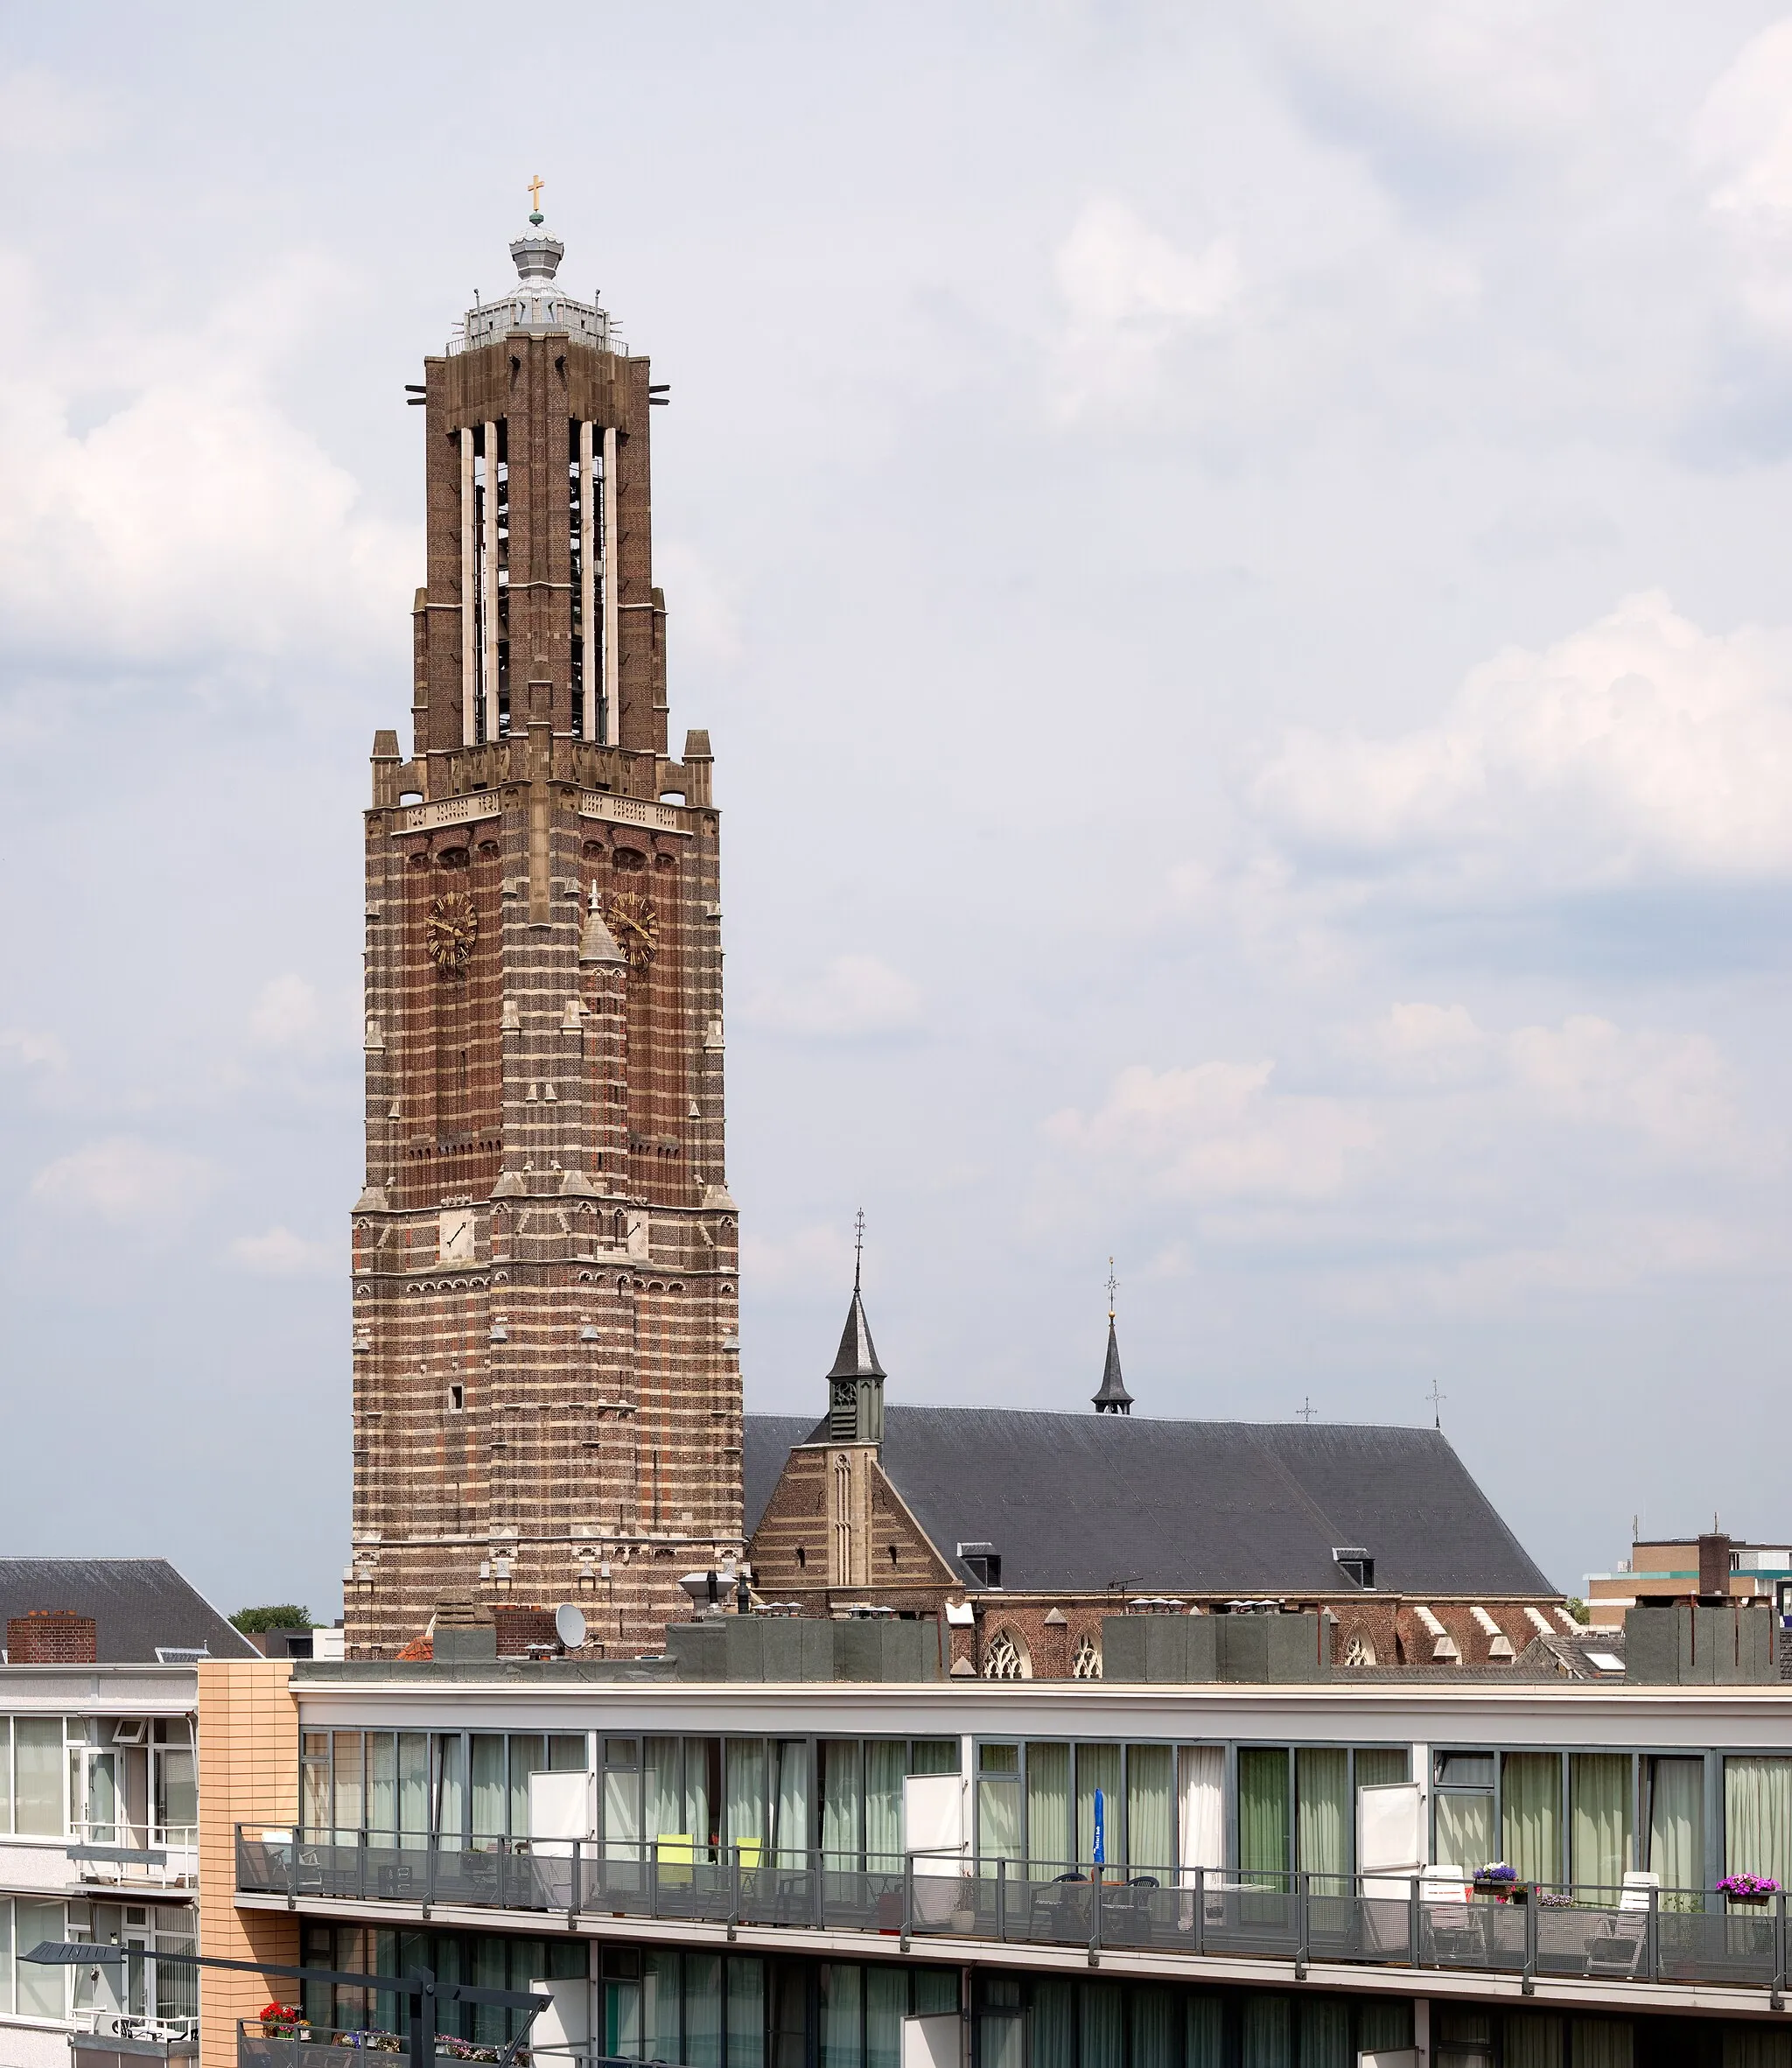 Photo showing: The Church of Saint Martin is the main landmark of the town of Weert in the province of Limburg, the Netherlands. The church was largely built during the Late Middle Ages. Its tower stands 78 meters high.